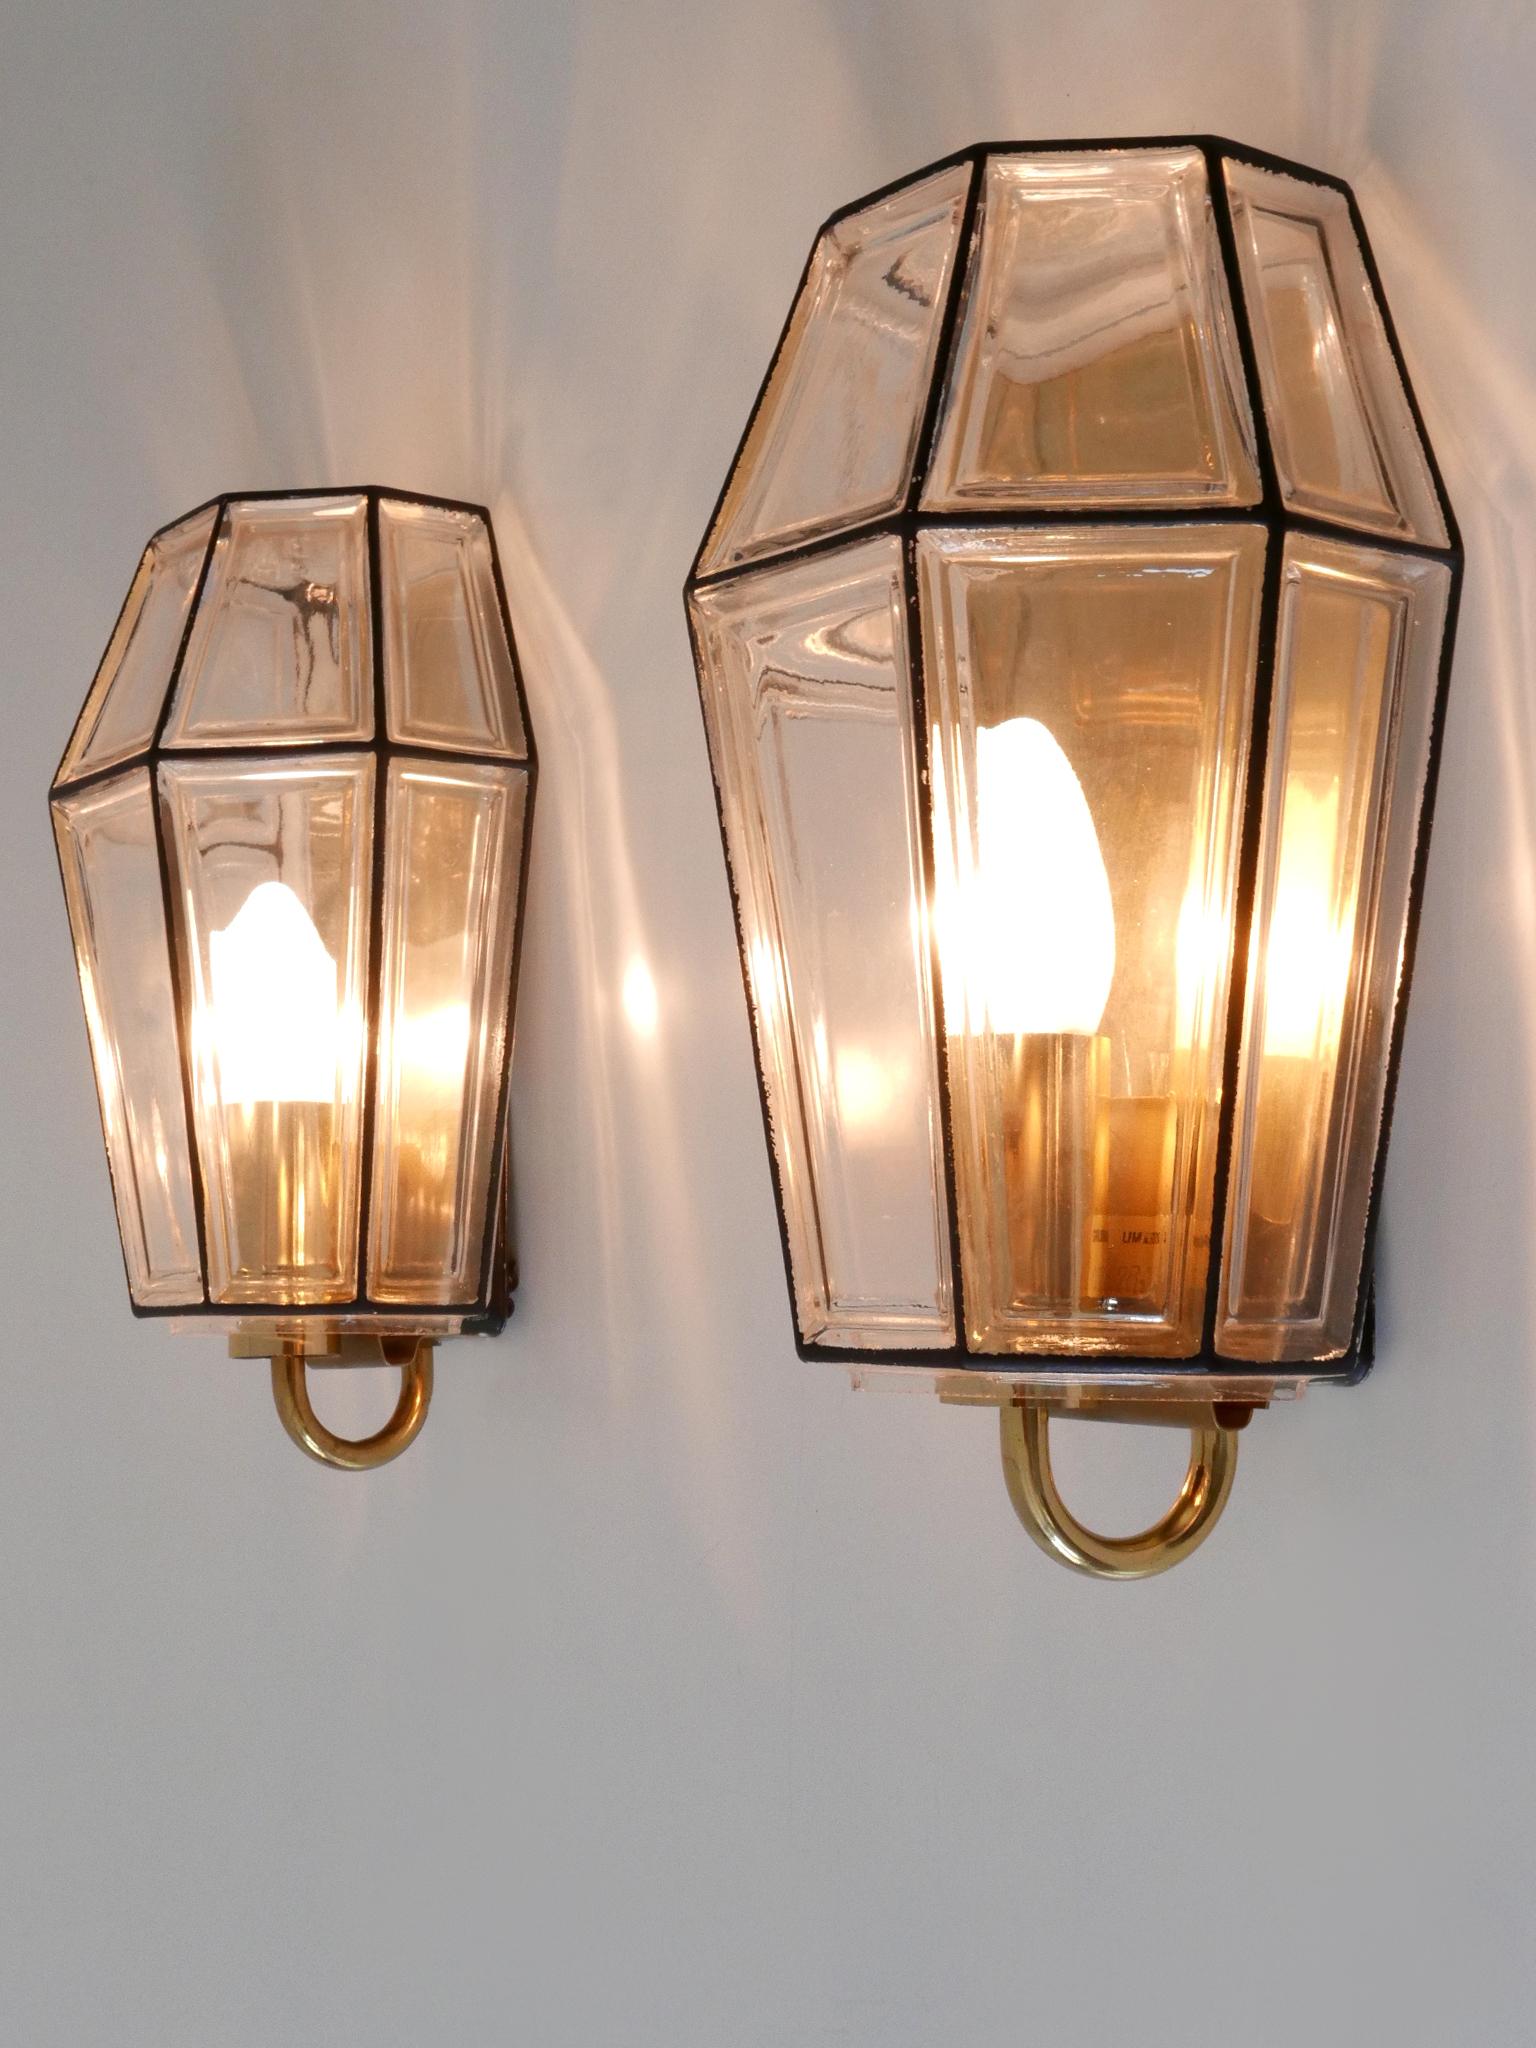 Set of Two Mid-Century Modern Sconces or Wall Fixtures by Glashütte Limburg In Good Condition For Sale In Munich, DE